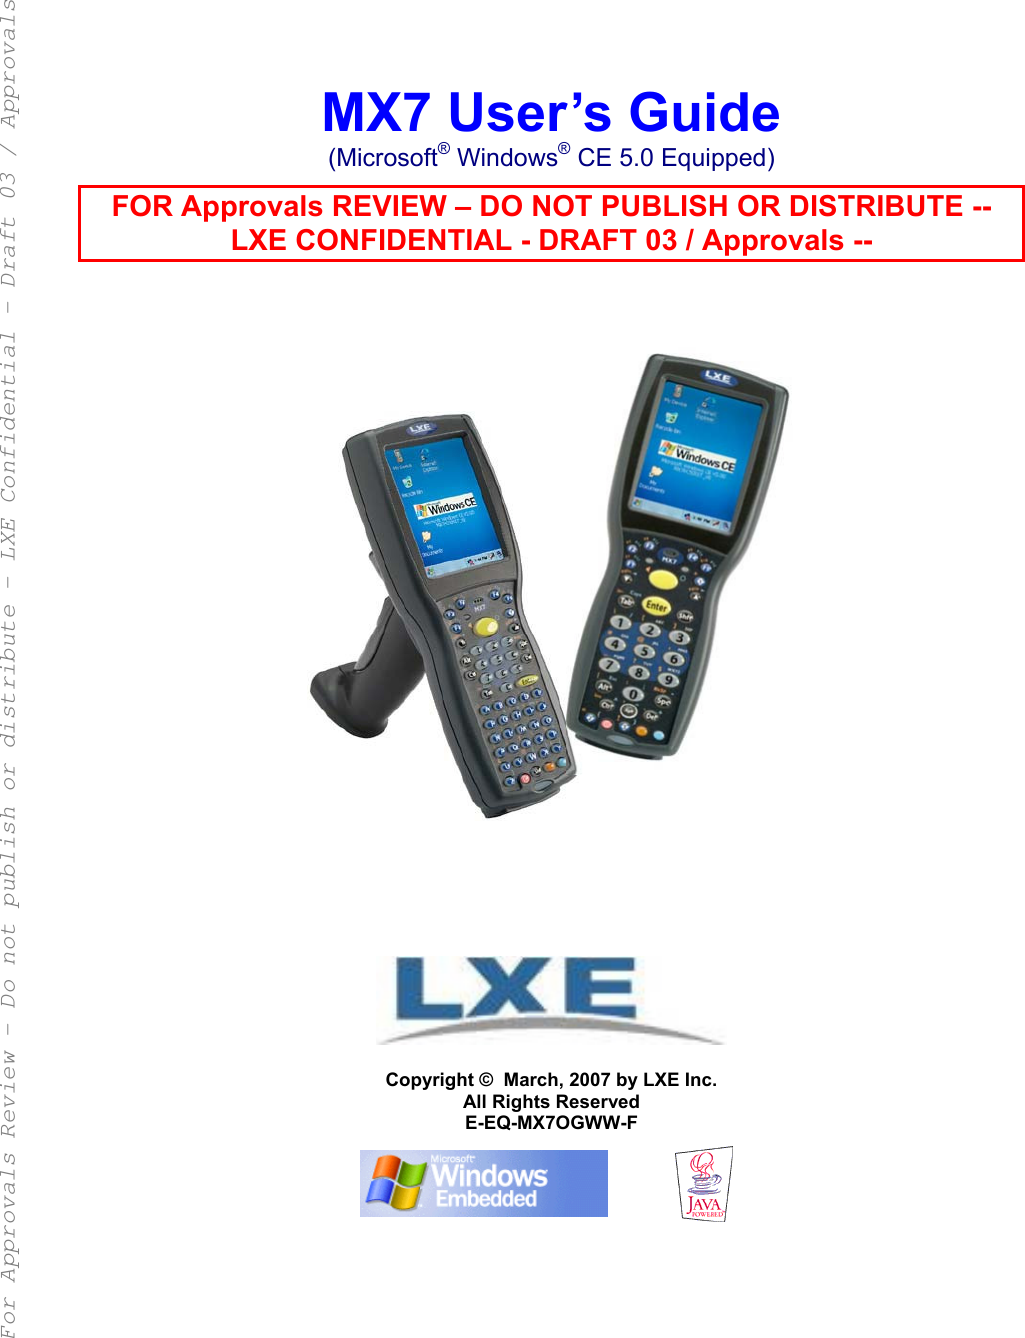     MX7 User’s Guide (Microsoft® Windows® CE 5.0 Equipped) FOR Approvals REVIEW – DO NOT PUBLISH OR DISTRIBUTE -- LXE CONFIDENTIAL - DRAFT 03 / Approvals --                    Copyright ©  March, 2007 by LXE Inc. All Rights Reserved E-EQ-MX7OGWW-F    For Approvals Review - Do not publish or distribute - LXE Confidential - Draft 03 / Approvals